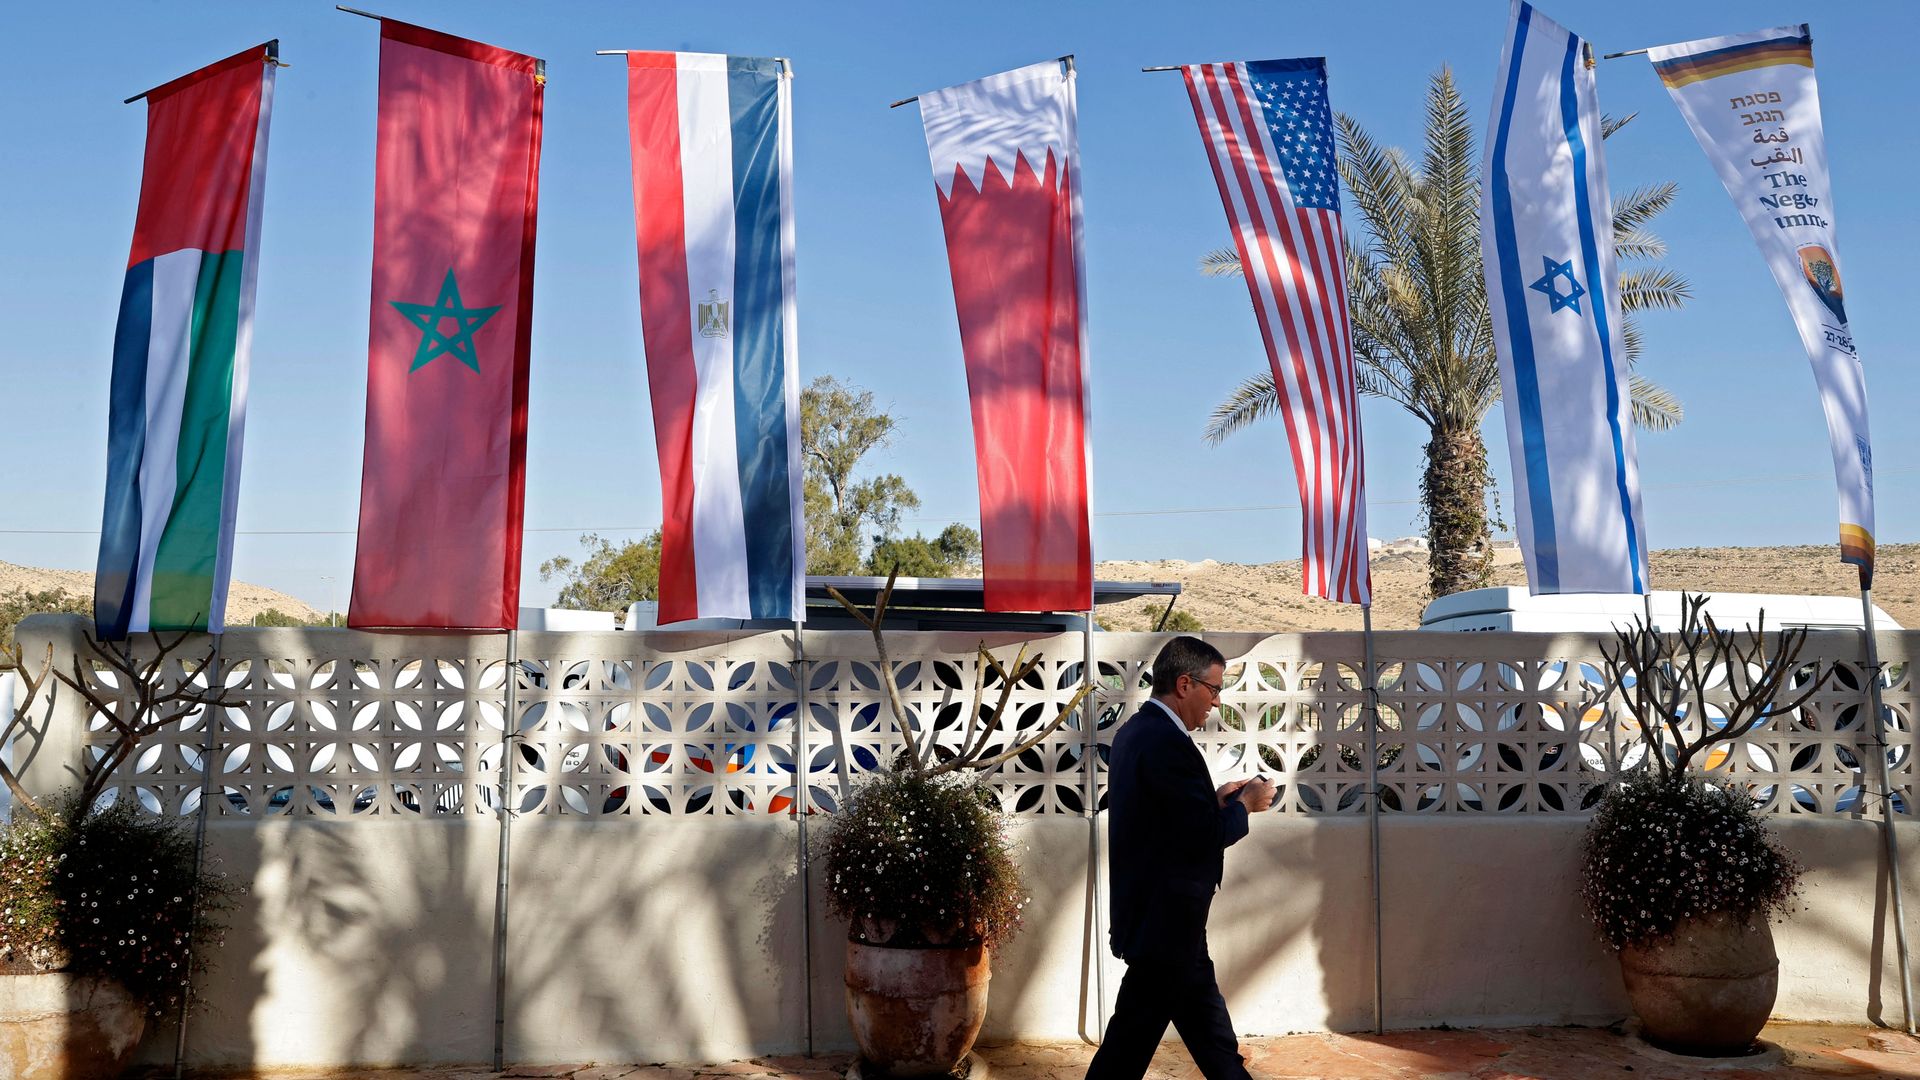 Flags are set up during Israel's Negev Summit attended by the US Secretary of State